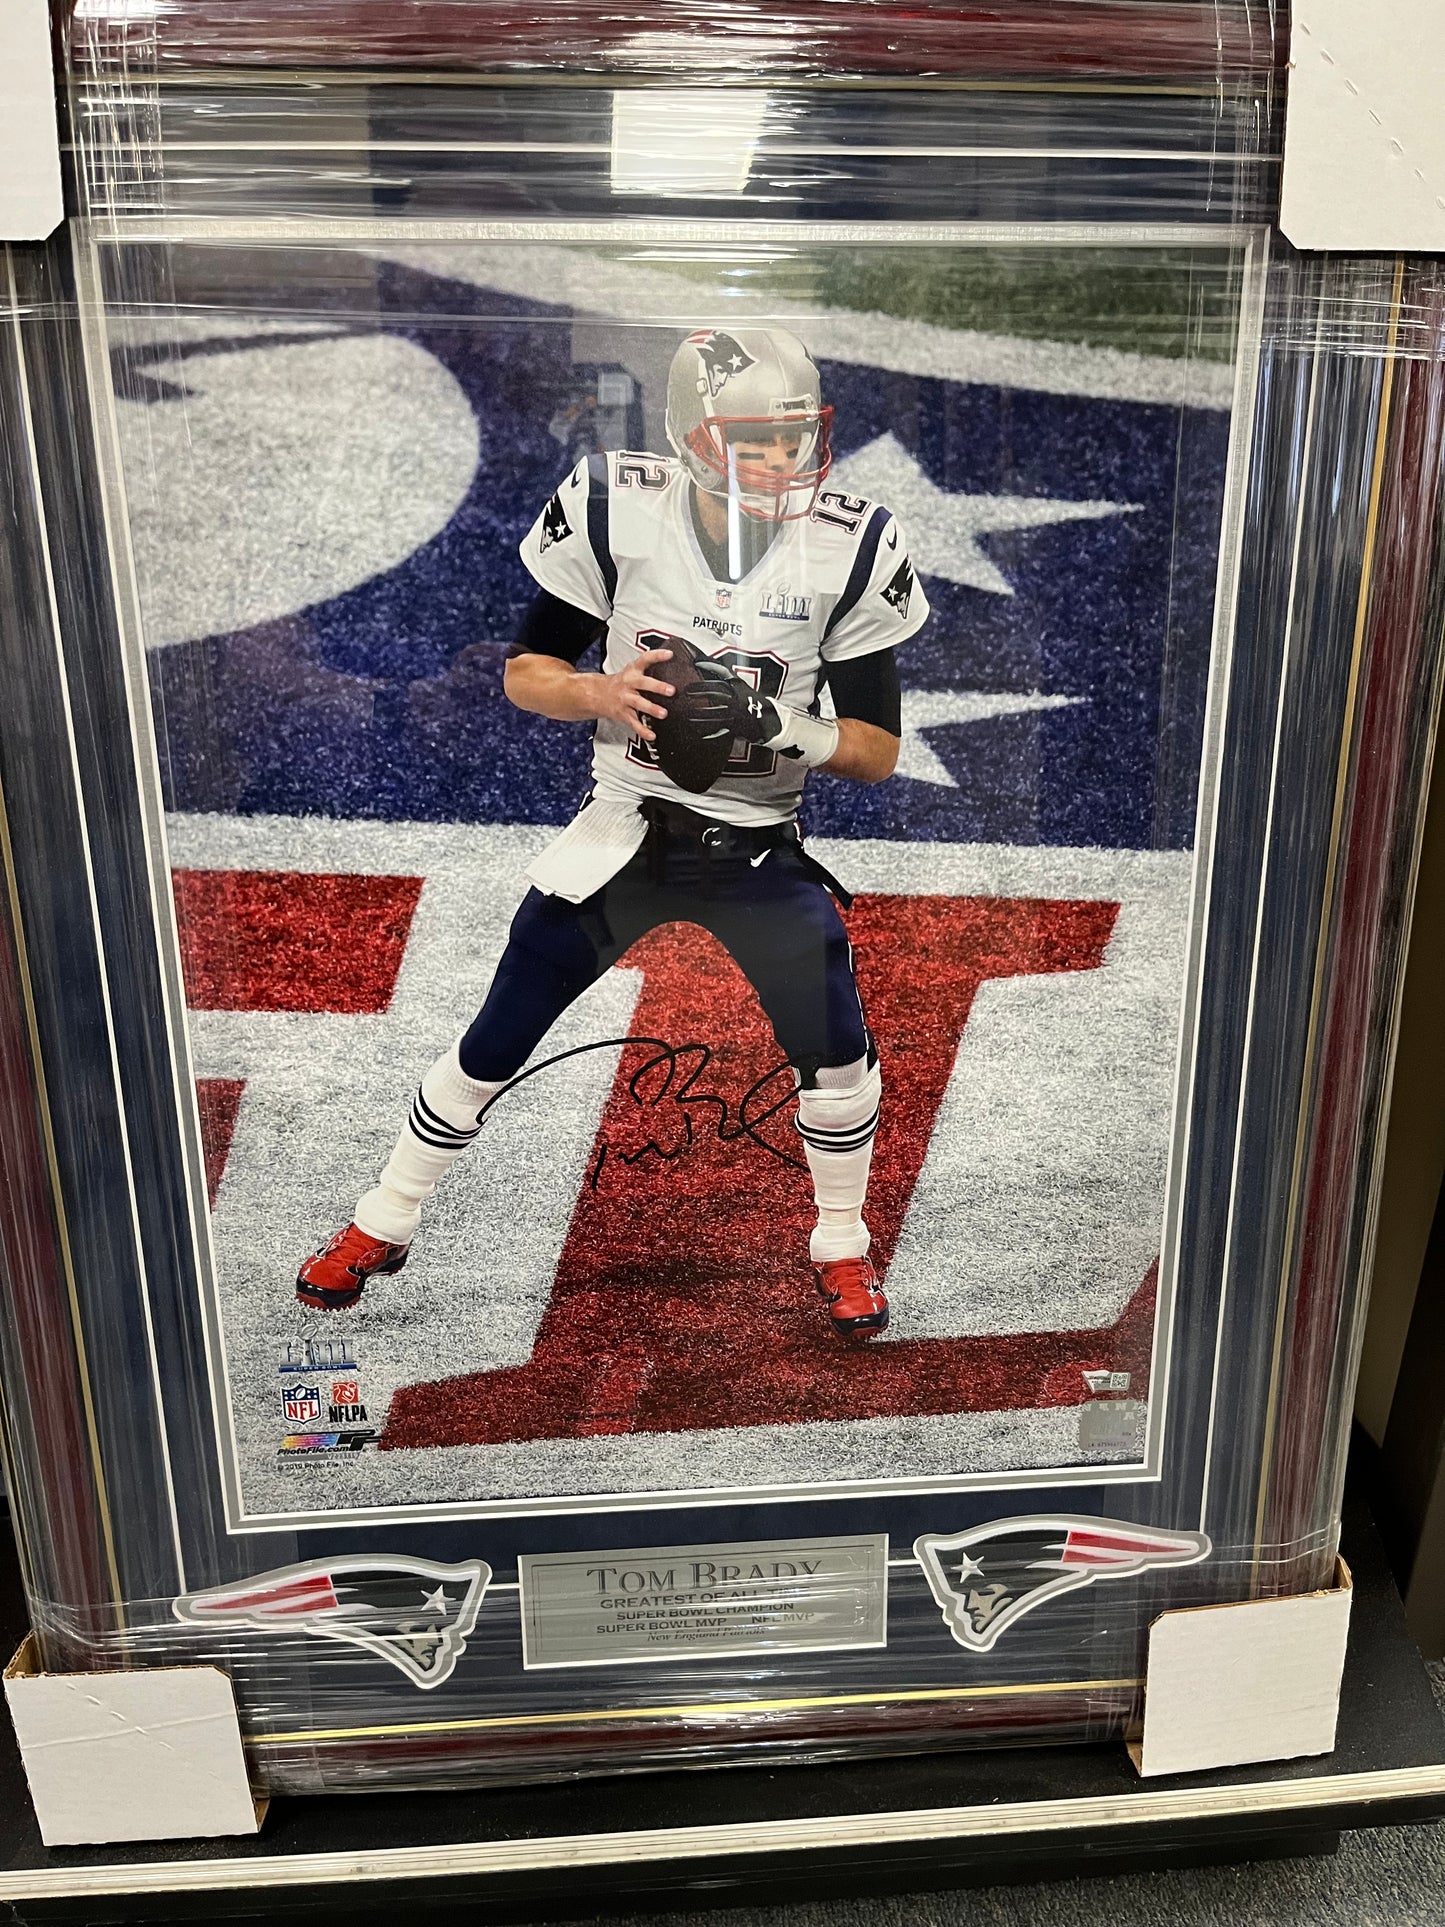 Tom Brady signed 16x20  "NFL LOGO" Profressionally mattted and framed to 22x24